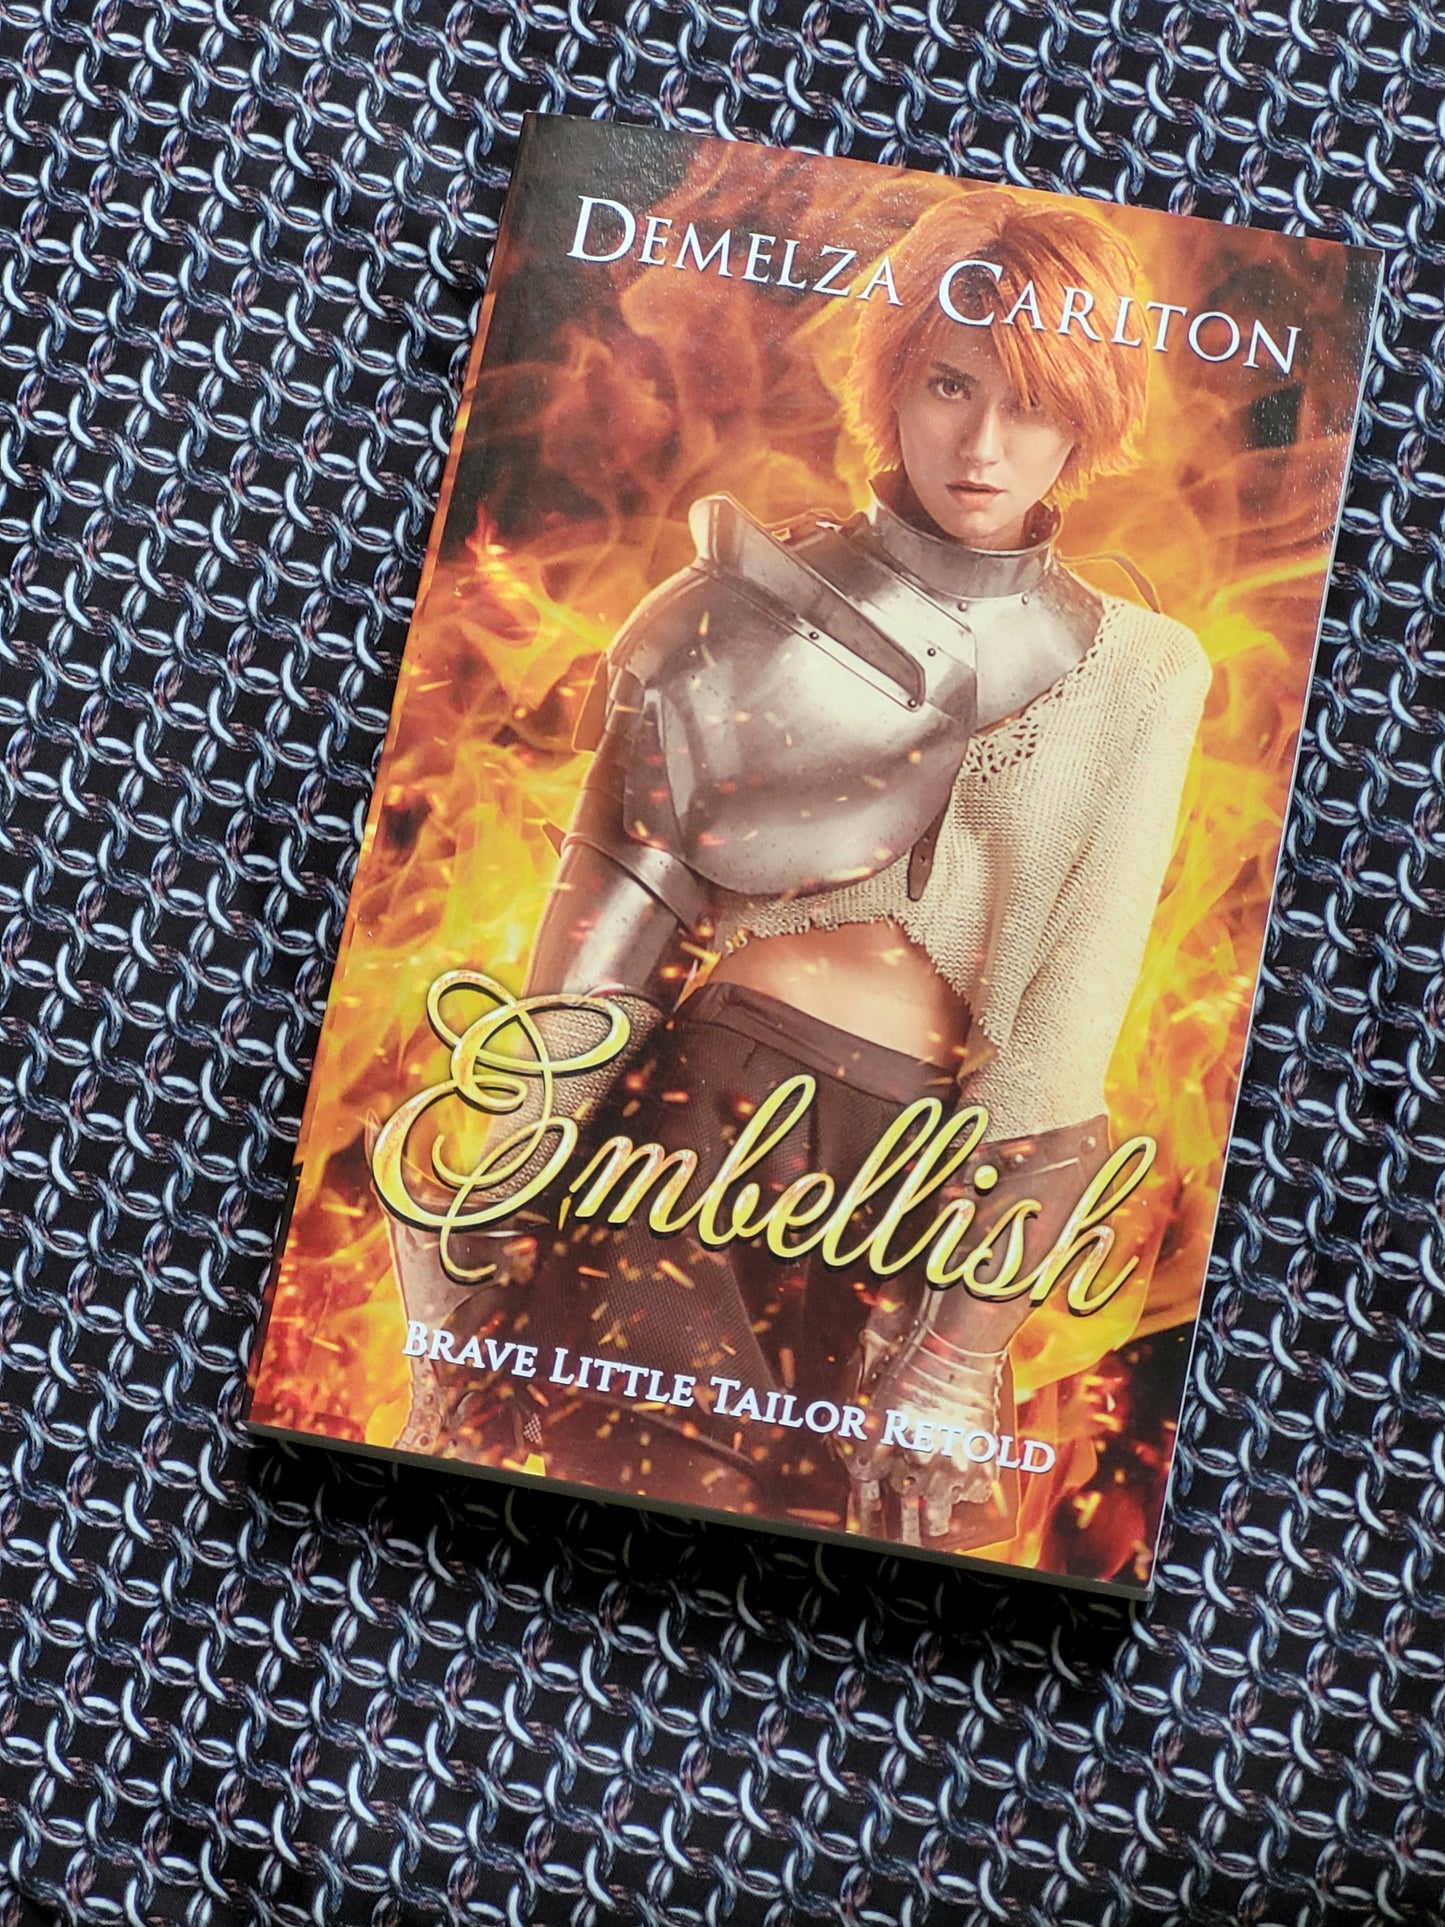 A steamy romantasy fairytale retelling mashup of the Brave Little Tailor and St George and the Dragon for fans of Sarah J Maas, ACOTAR, Raven Kennedy, Charlaine Harris, Juliet Marillier and Rebecca Yarros